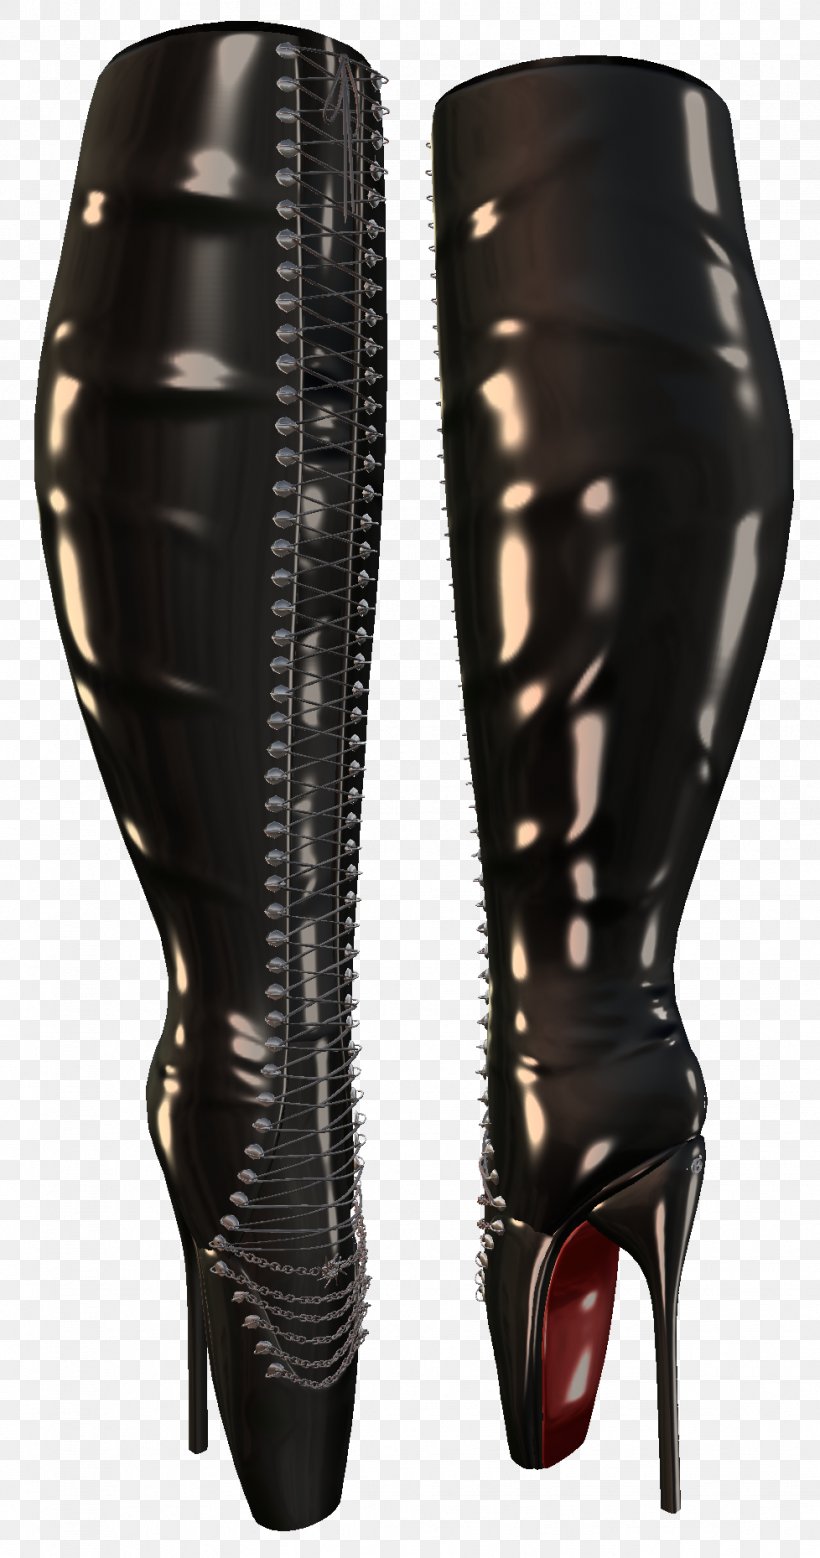 Riding Boot High-heeled Footwear Shoe, PNG, 978x1859px, Boot, Burlesque, Color, Foot, Footwear Download Free